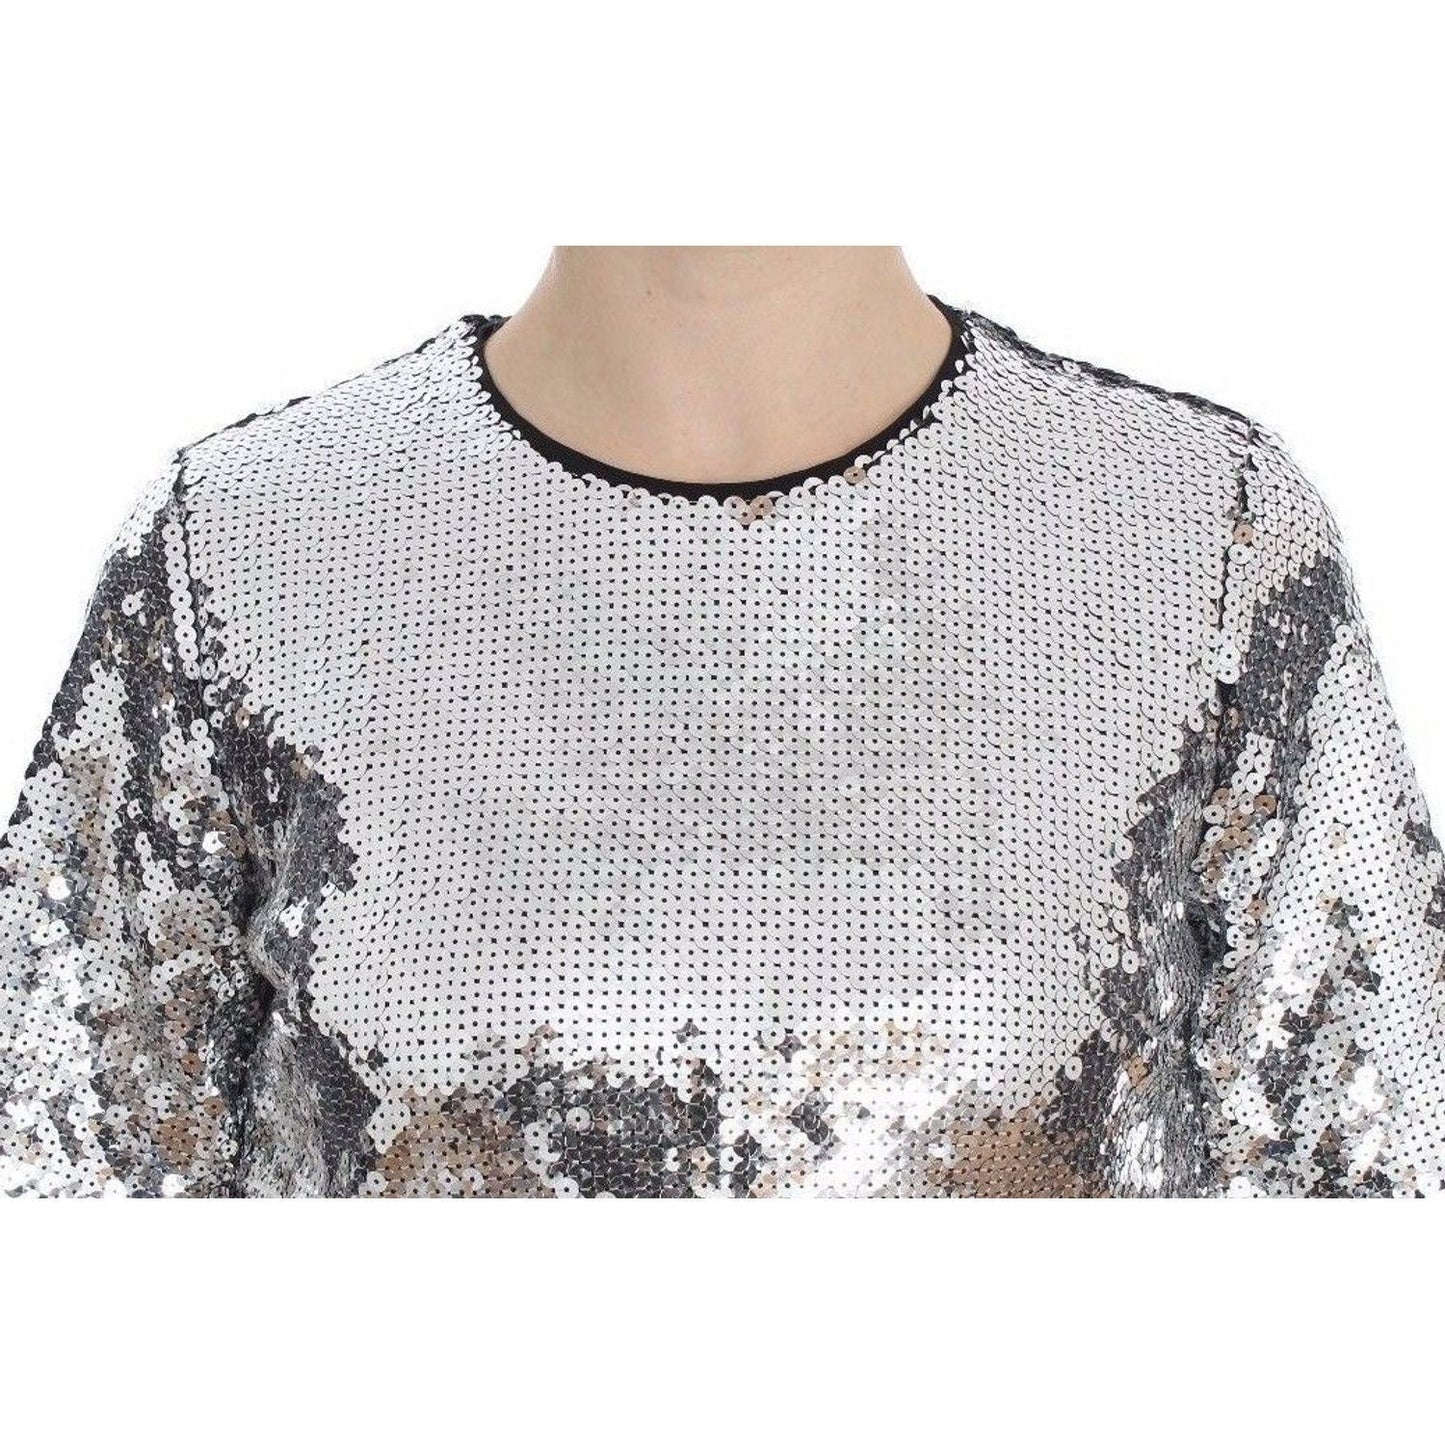 Dolce & Gabbana Sequined Elegance Blouse silver-sequined-crewneck-blouse-t-shirt-top-1